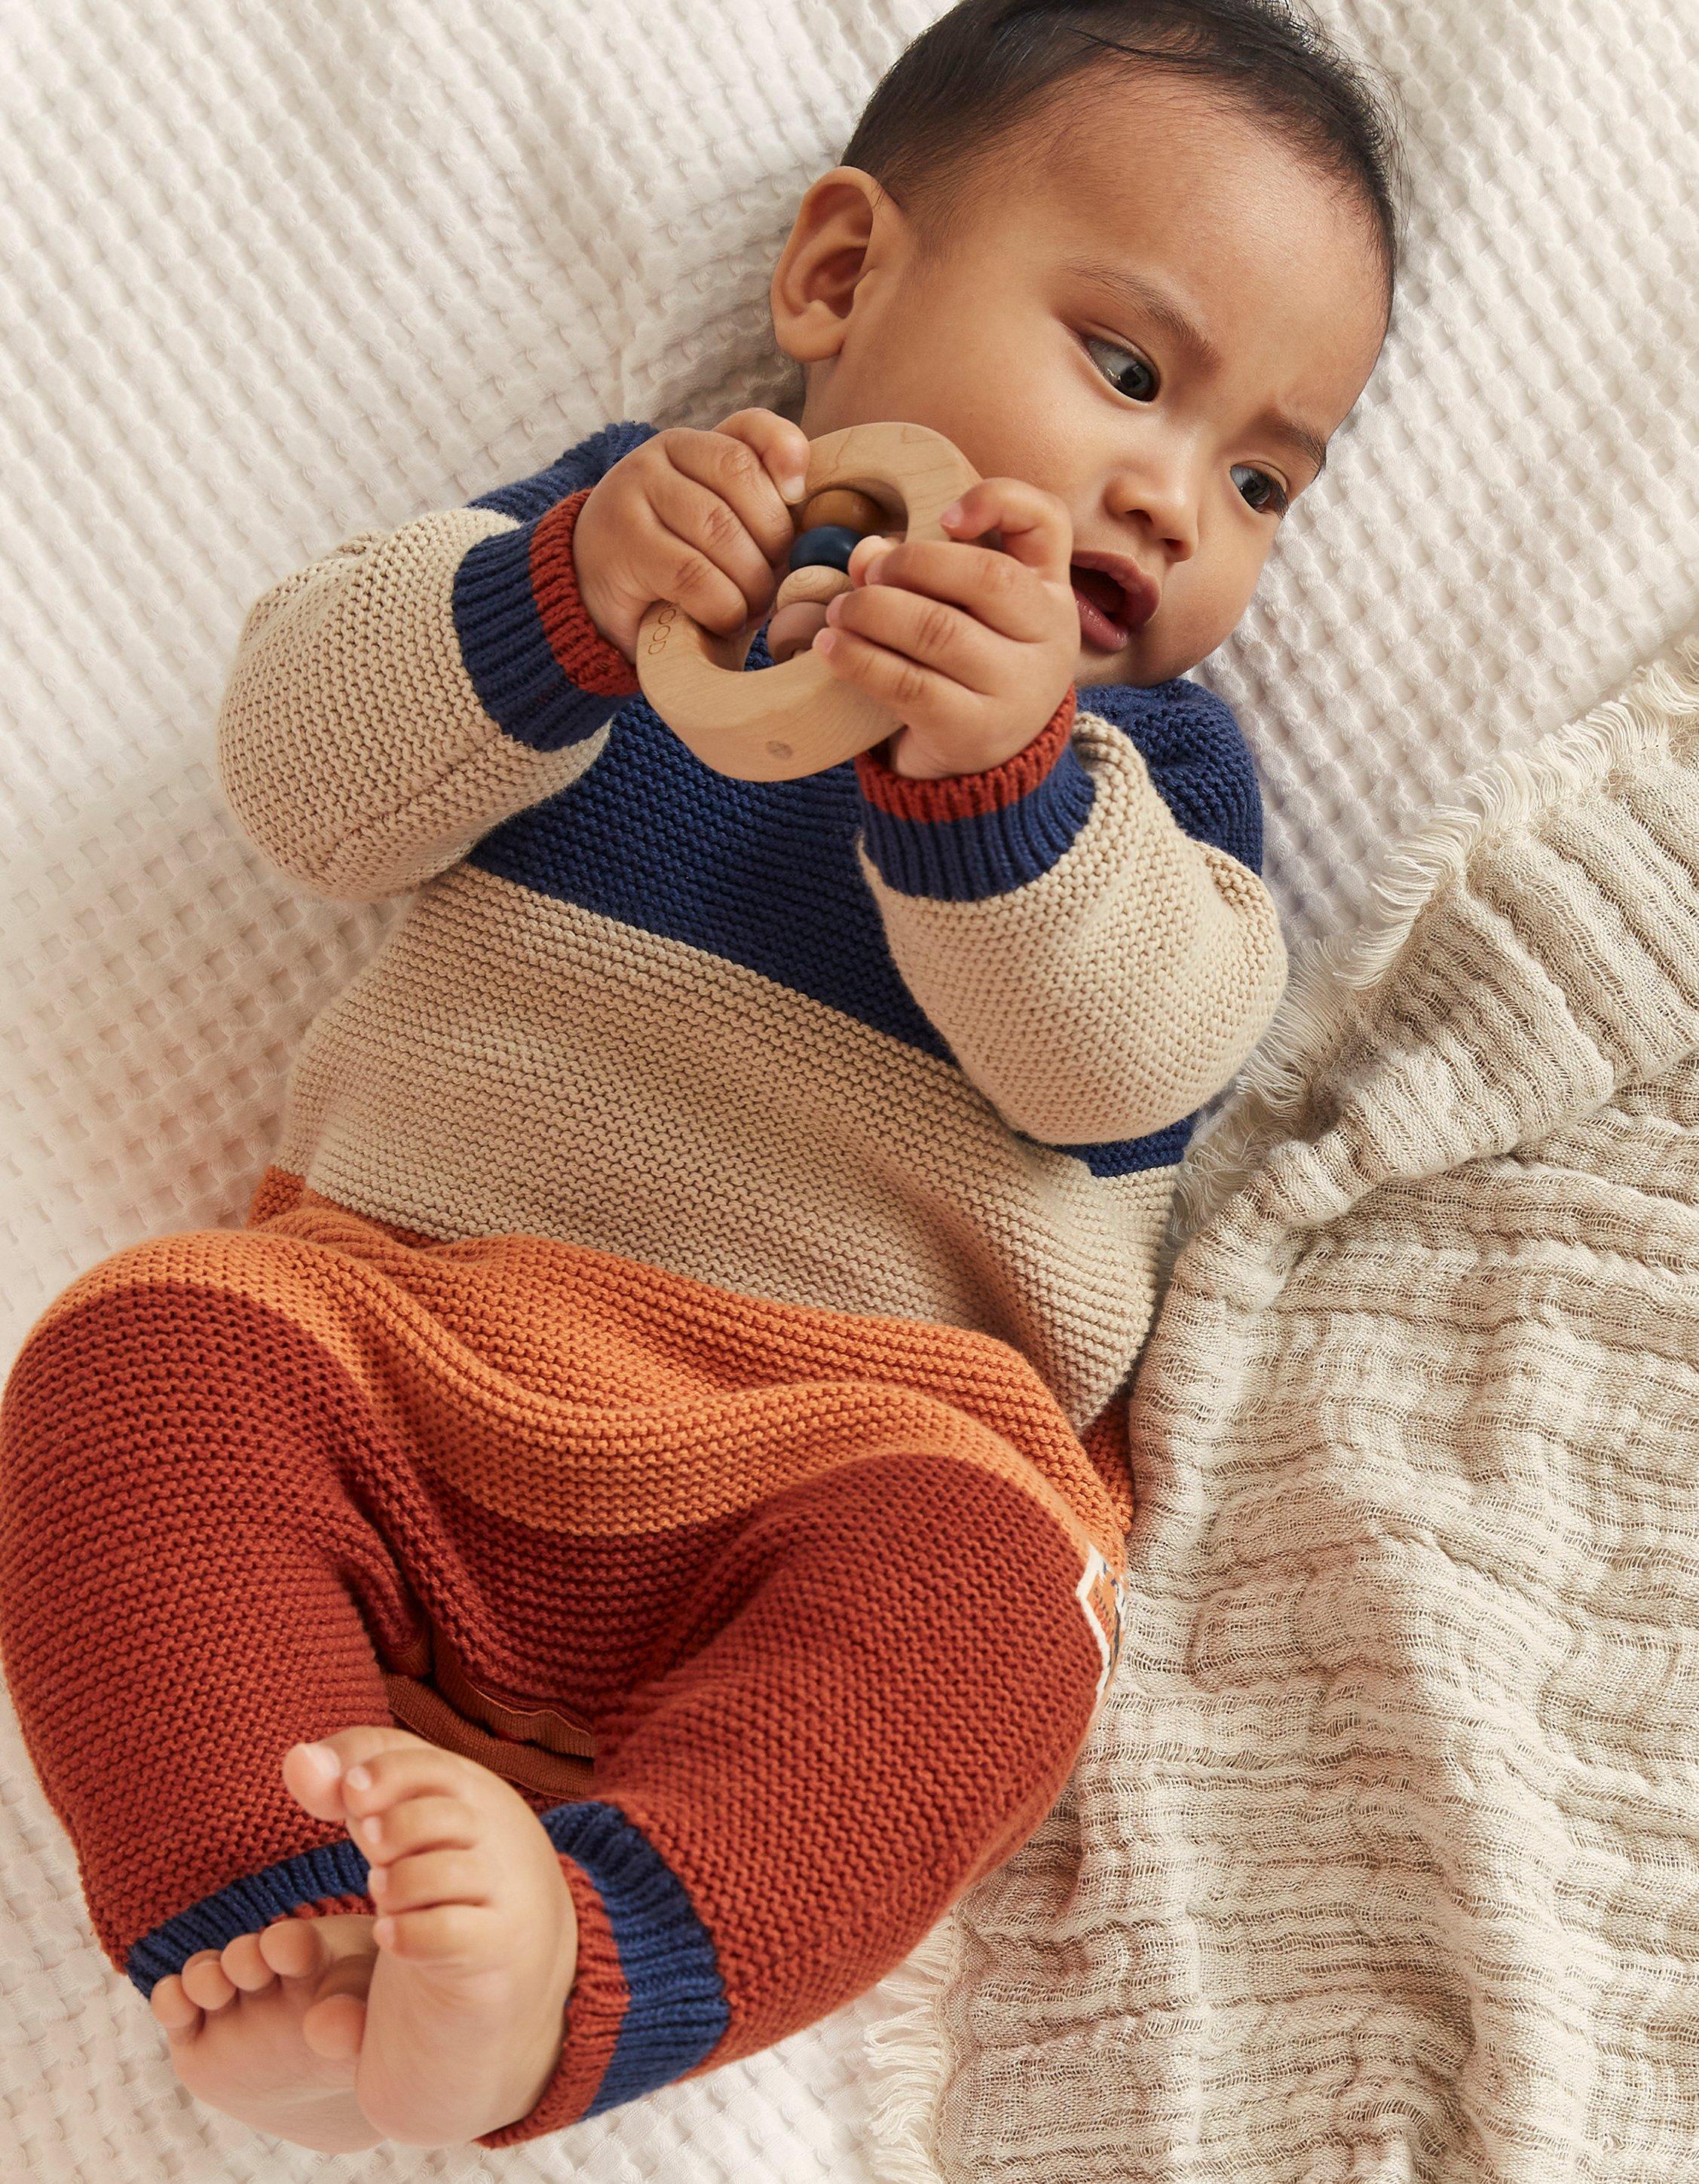 10 affordable (but stylish) baby clothing brands - Today's Parent